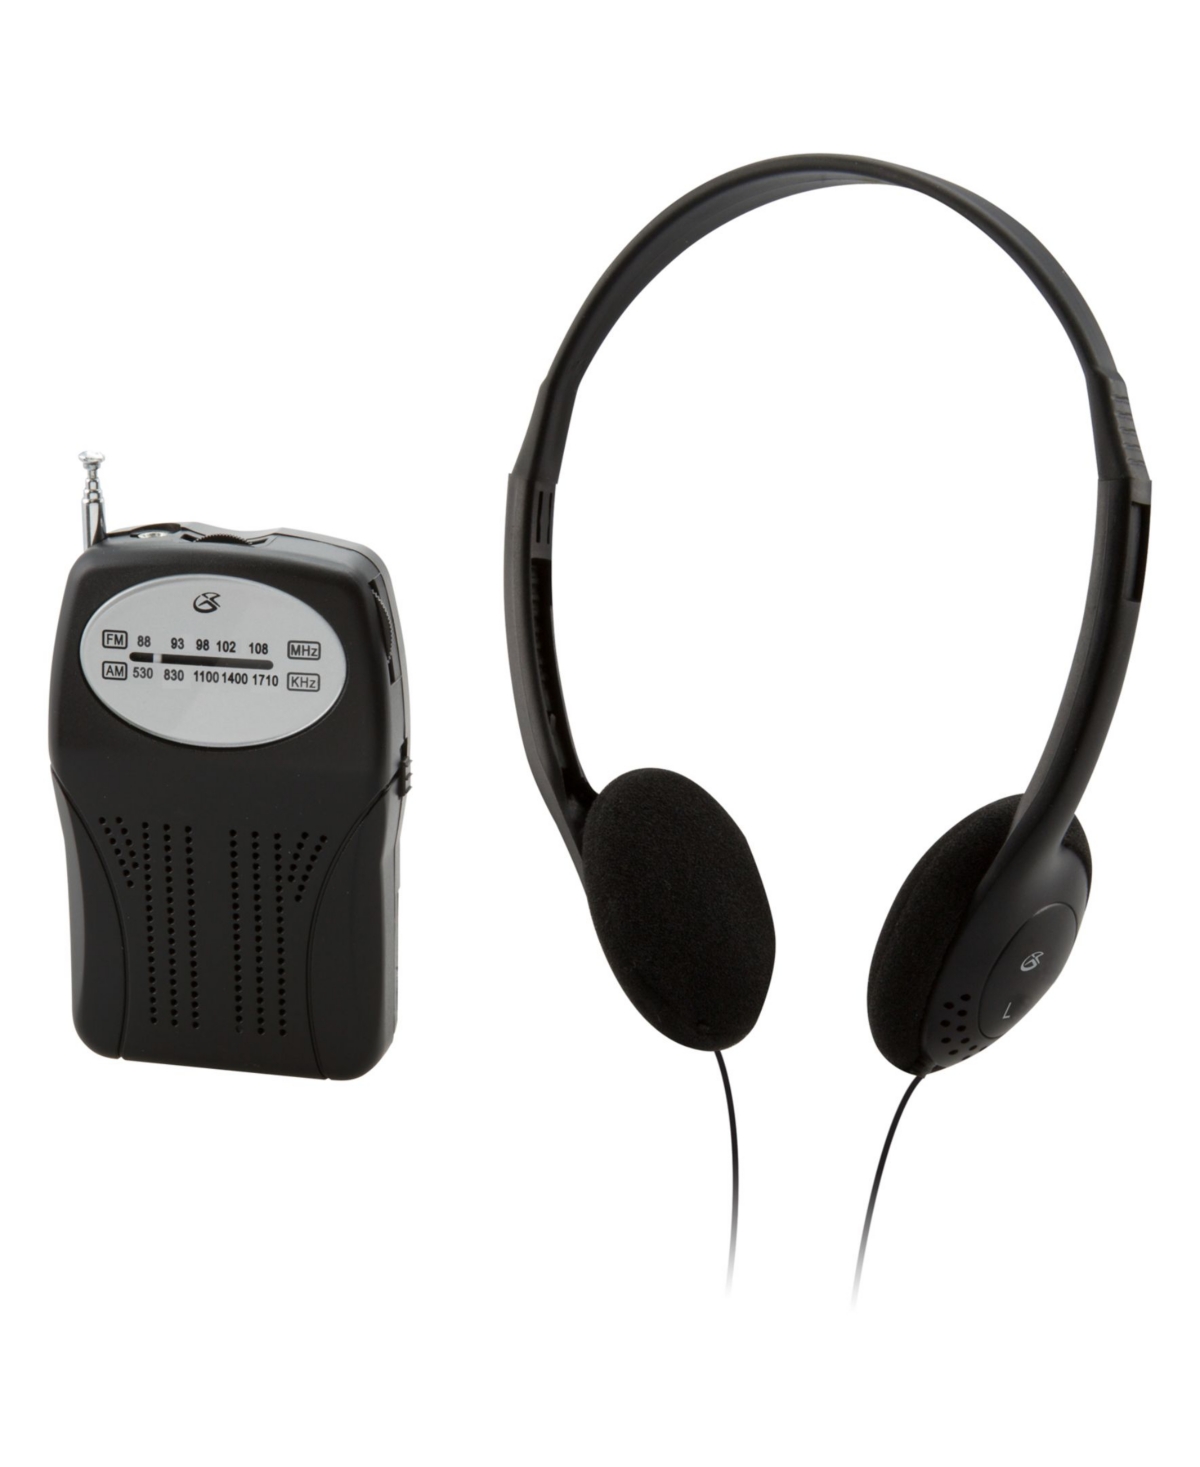 Gpx Am And Fm Handheld Radio With Headphones In Black